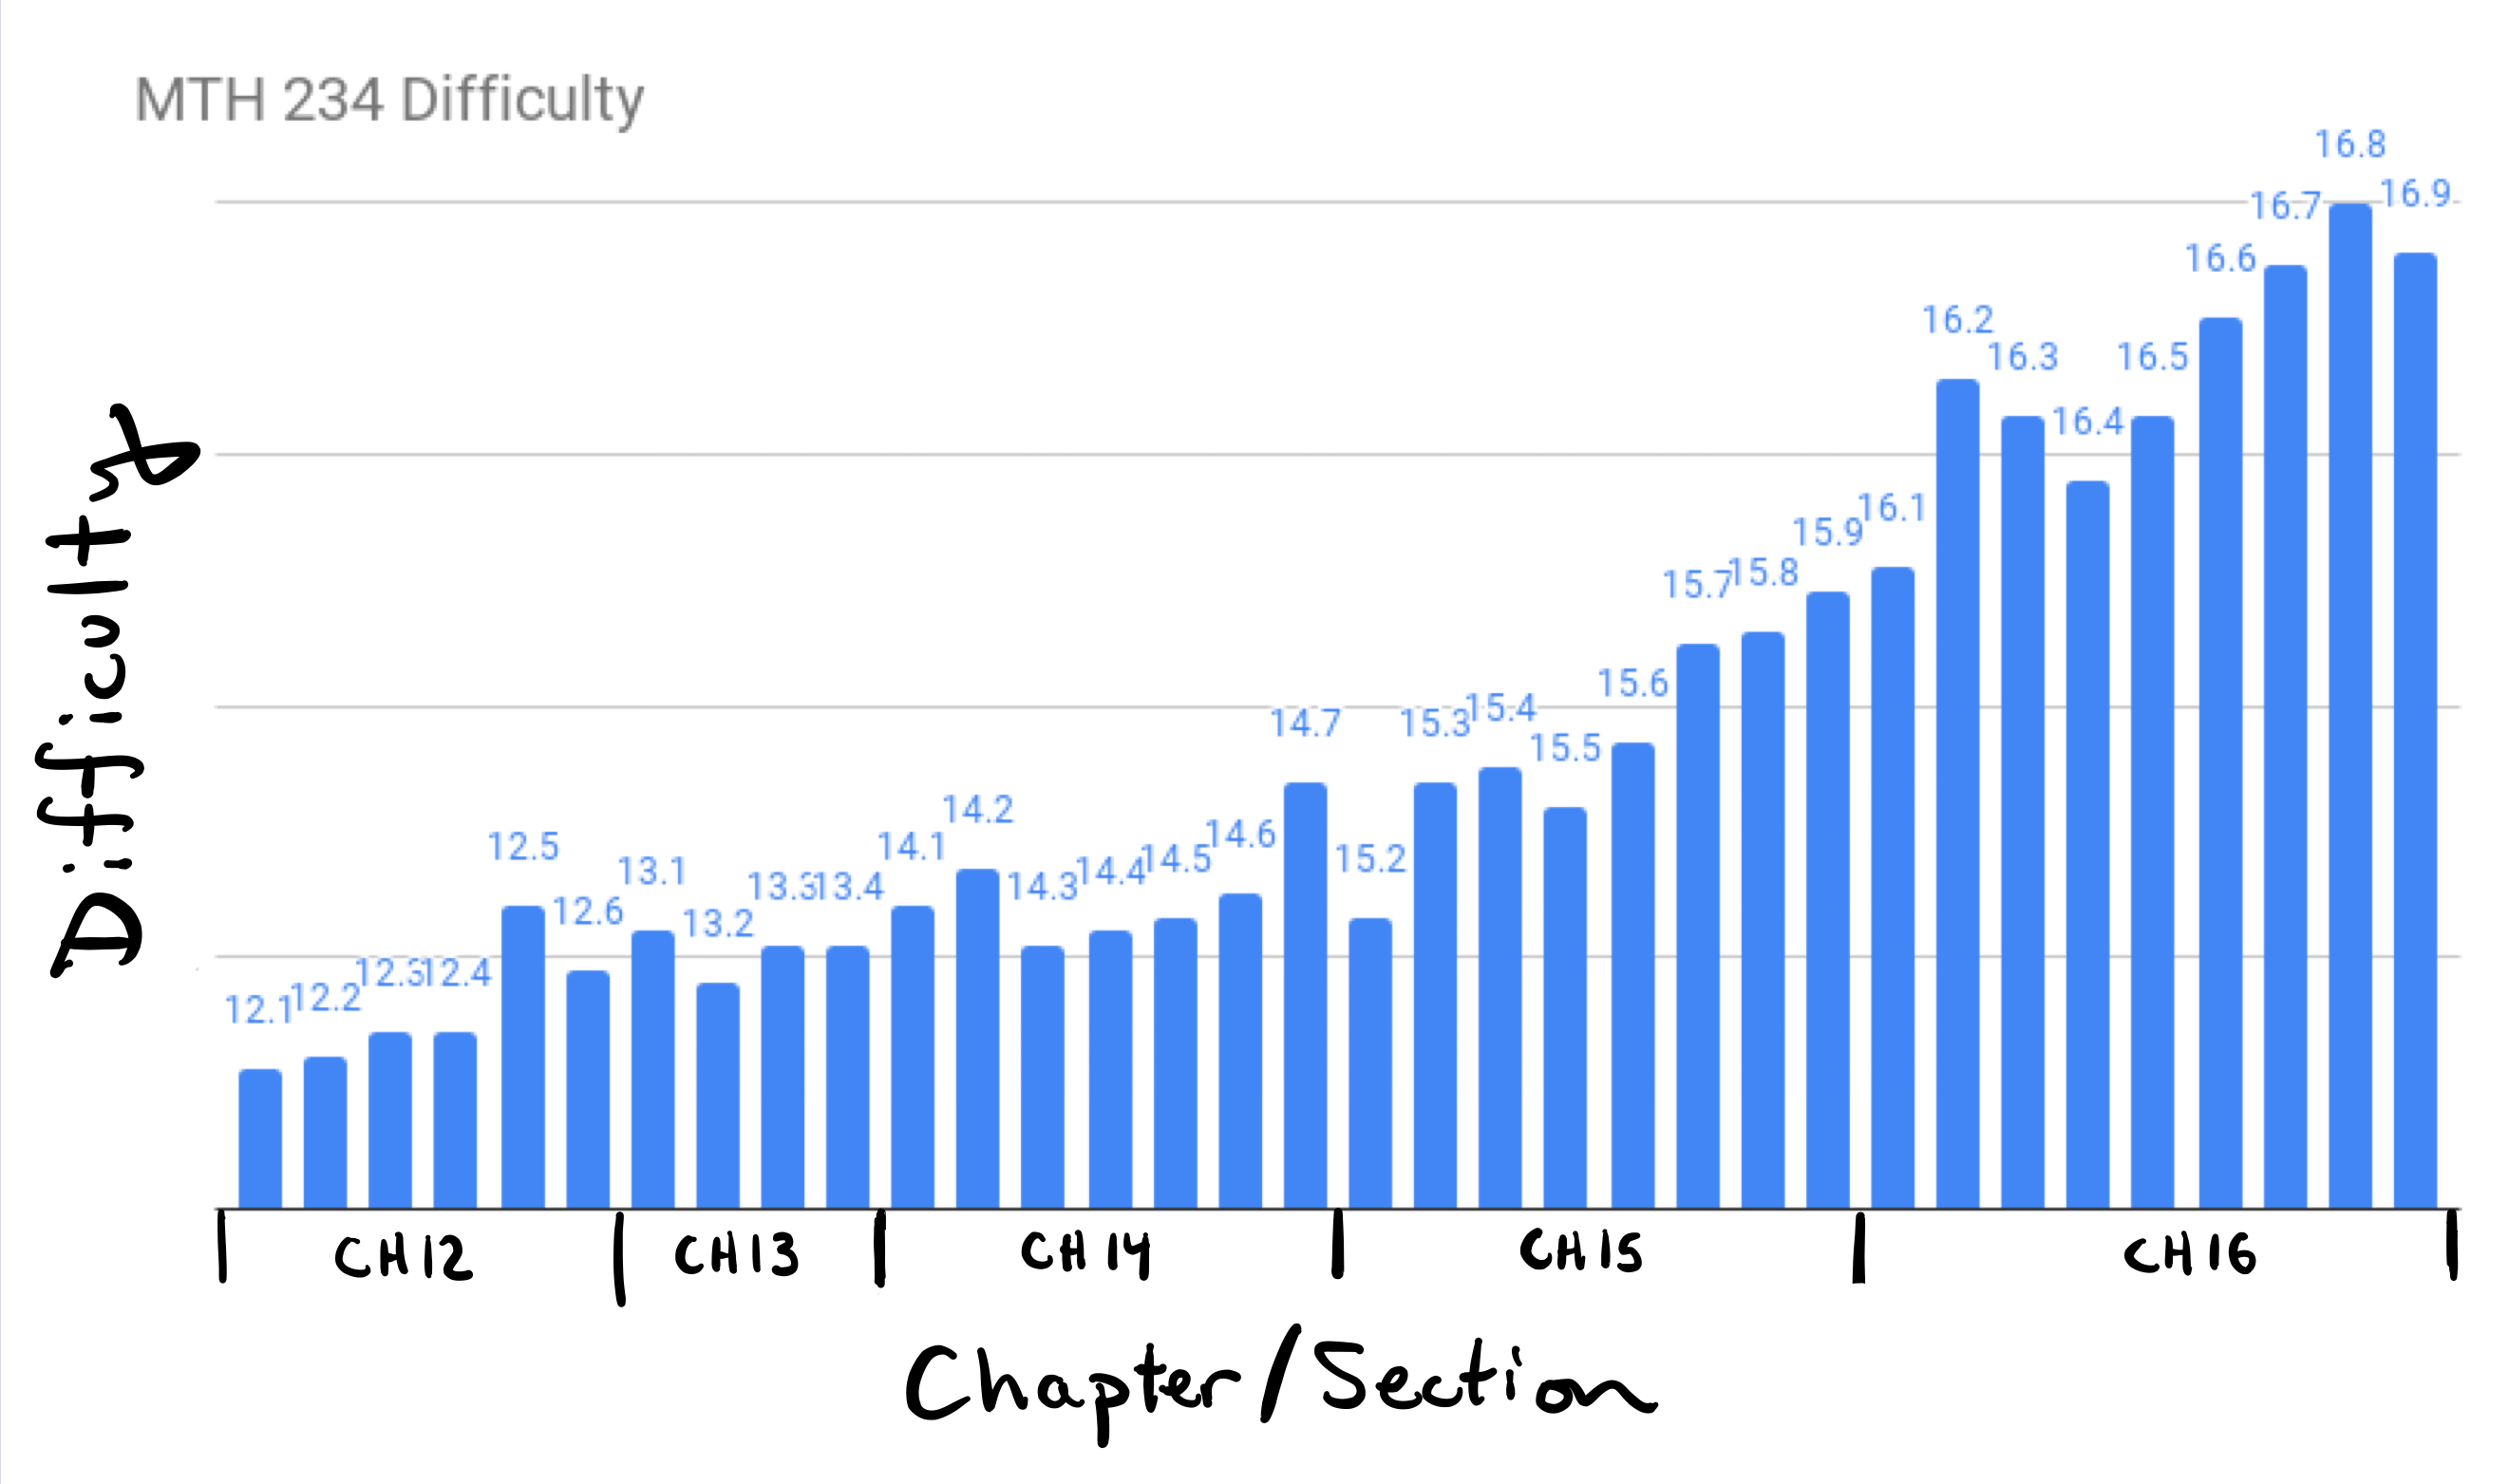 Graph showing the class gets exponentially harder as the chapters progress from chapter 12 through chapter 16.